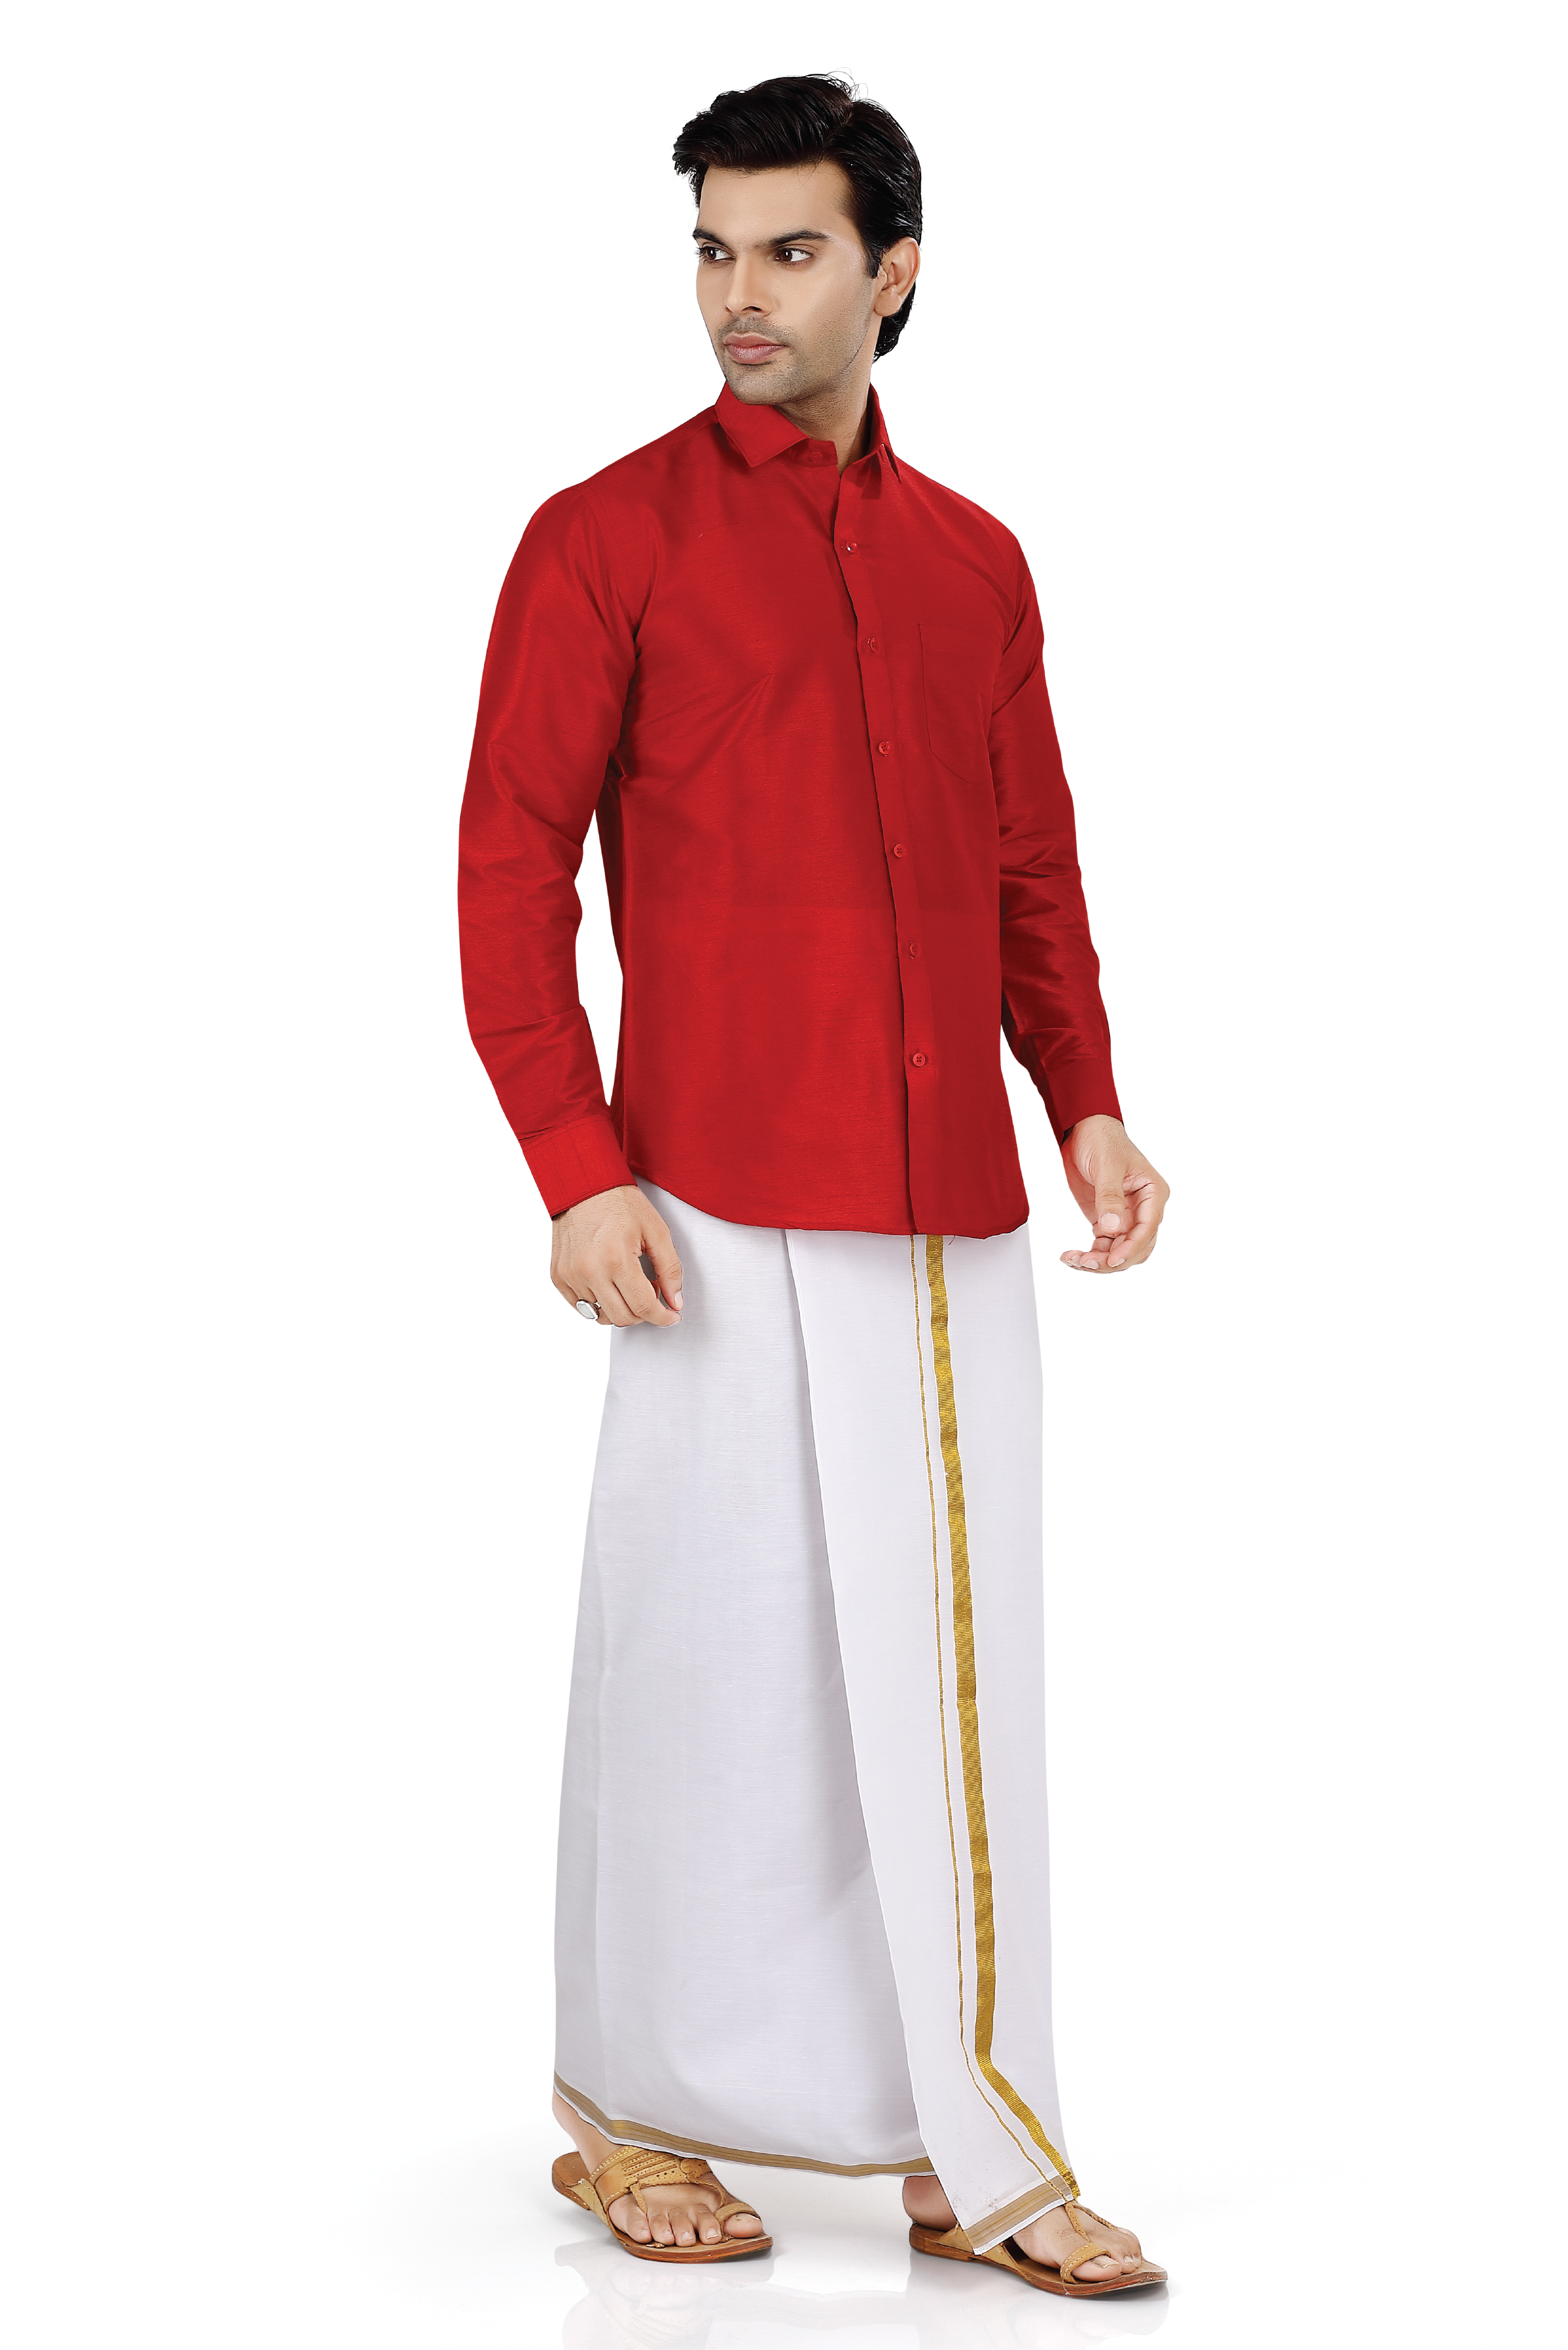 Dupion Silk Shirt in Red Full sleeves with Cotton Dhoti